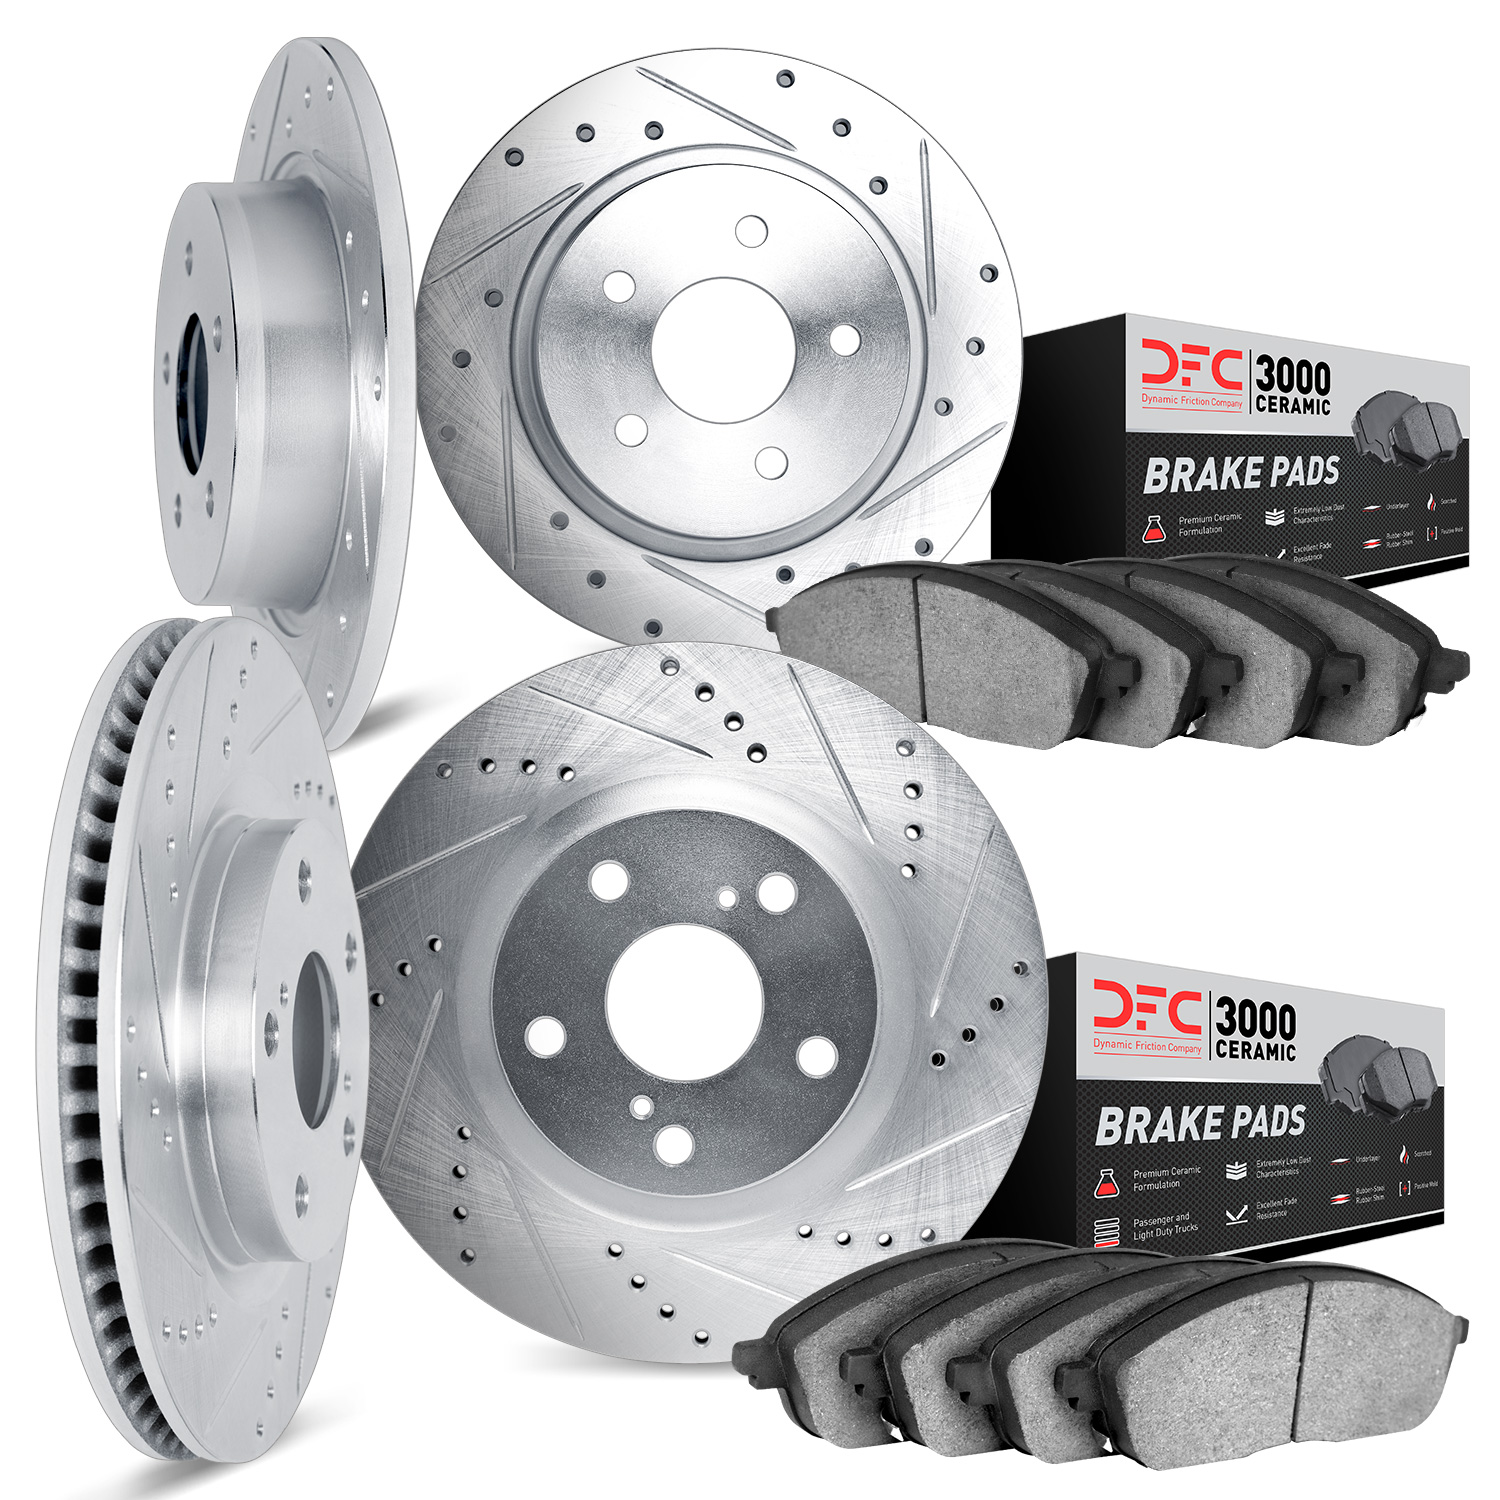 7304-80020 Drilled/Slotted Brake Rotor with 3000-Series Ceramic Brake Pads Kit [Silver], 2003-2003 Ford/Lincoln/Mercury/Mazda, P